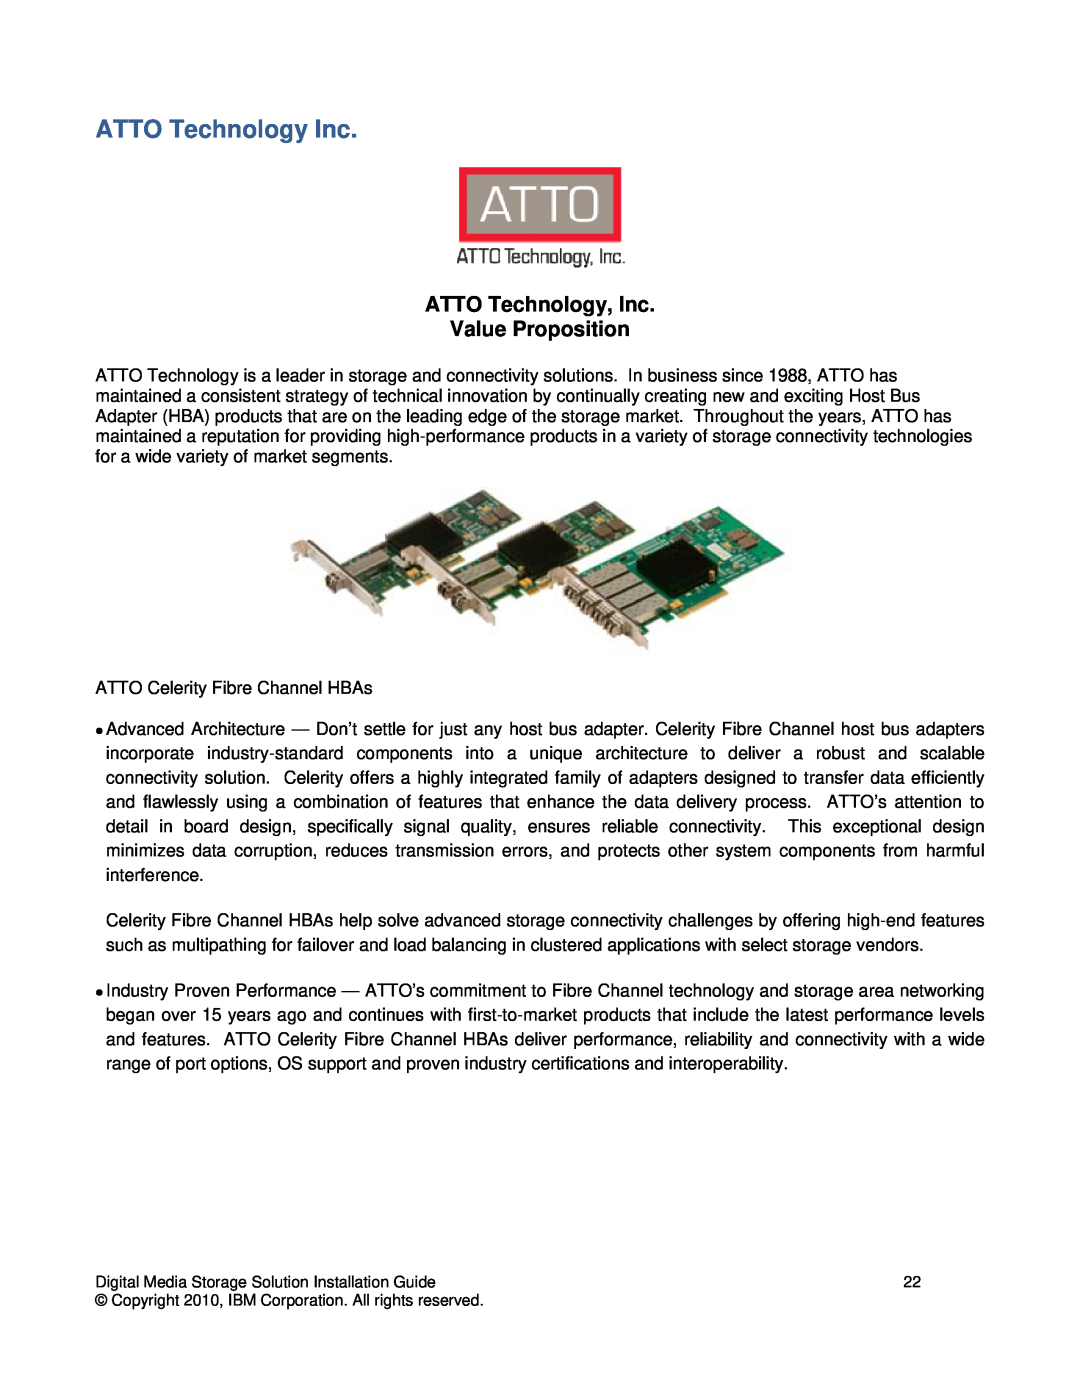 IBM DS3000 manual ATTO Technology Inc, ATTO Technology, Inc Value Proposition 